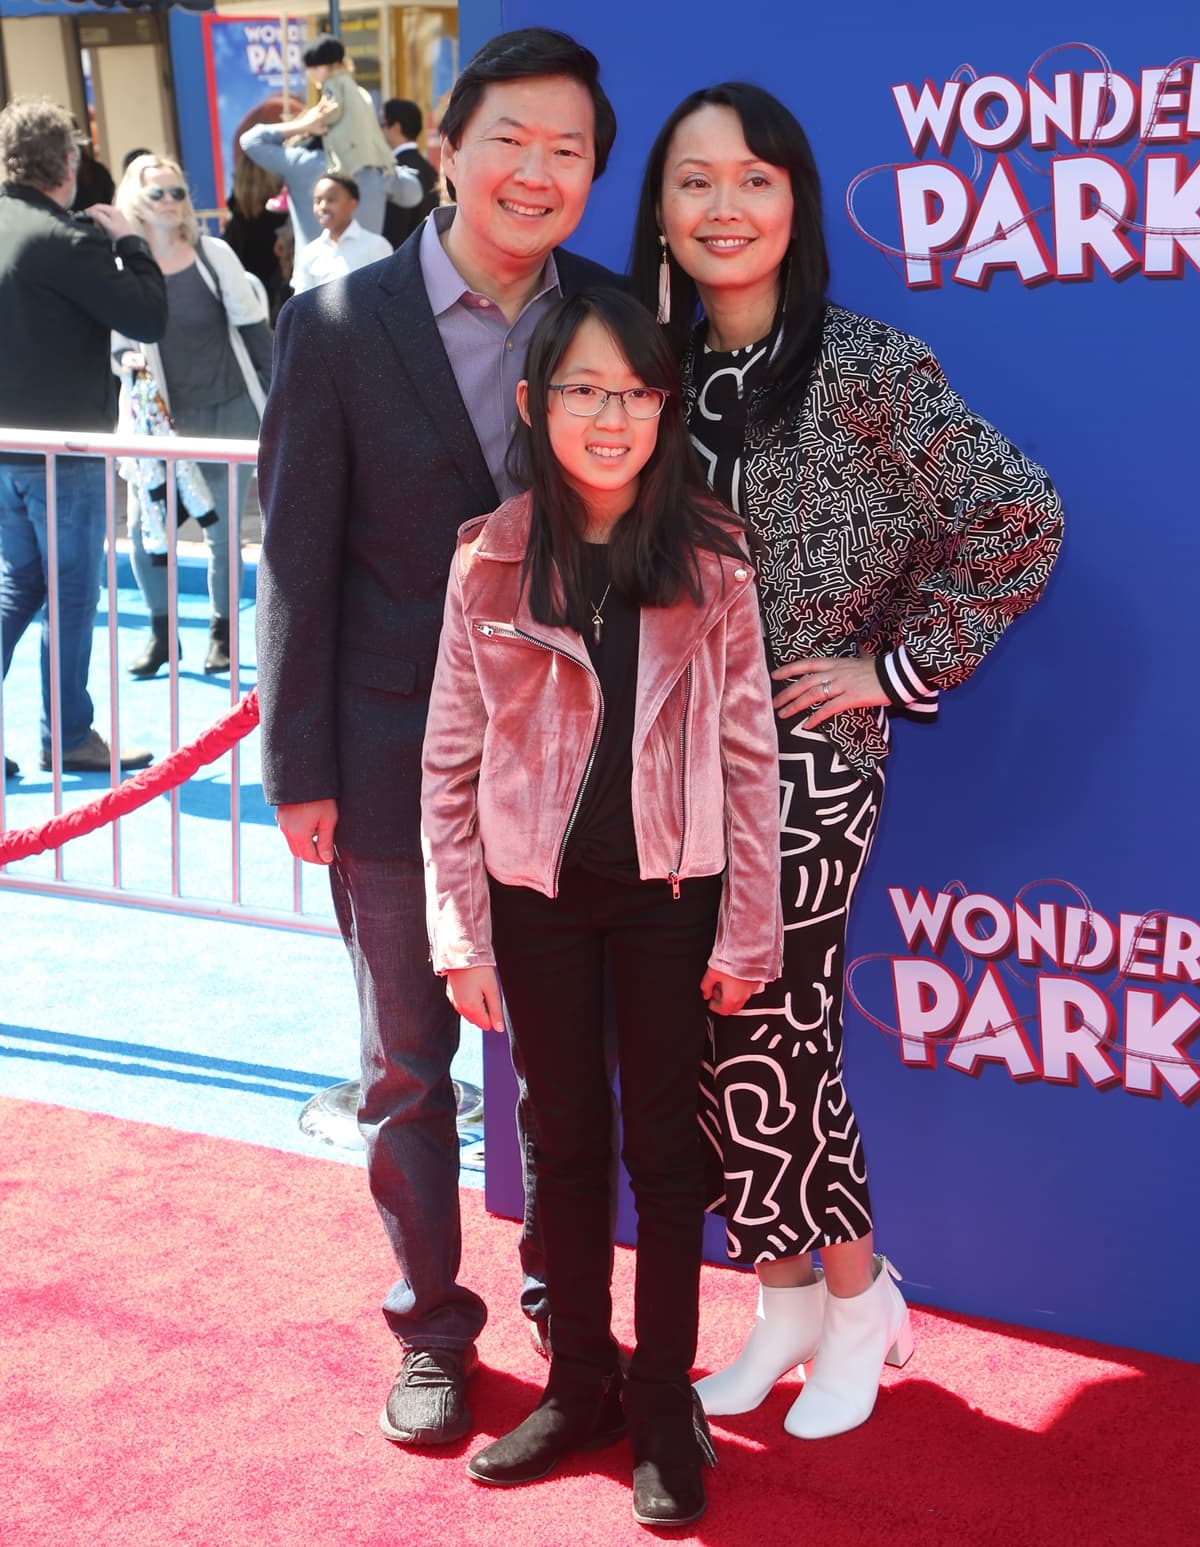 Ken Jeong with his wife Tran Jeong and his daughter Zooey at the premiere of Paramount Pictures' "Wonder Park"